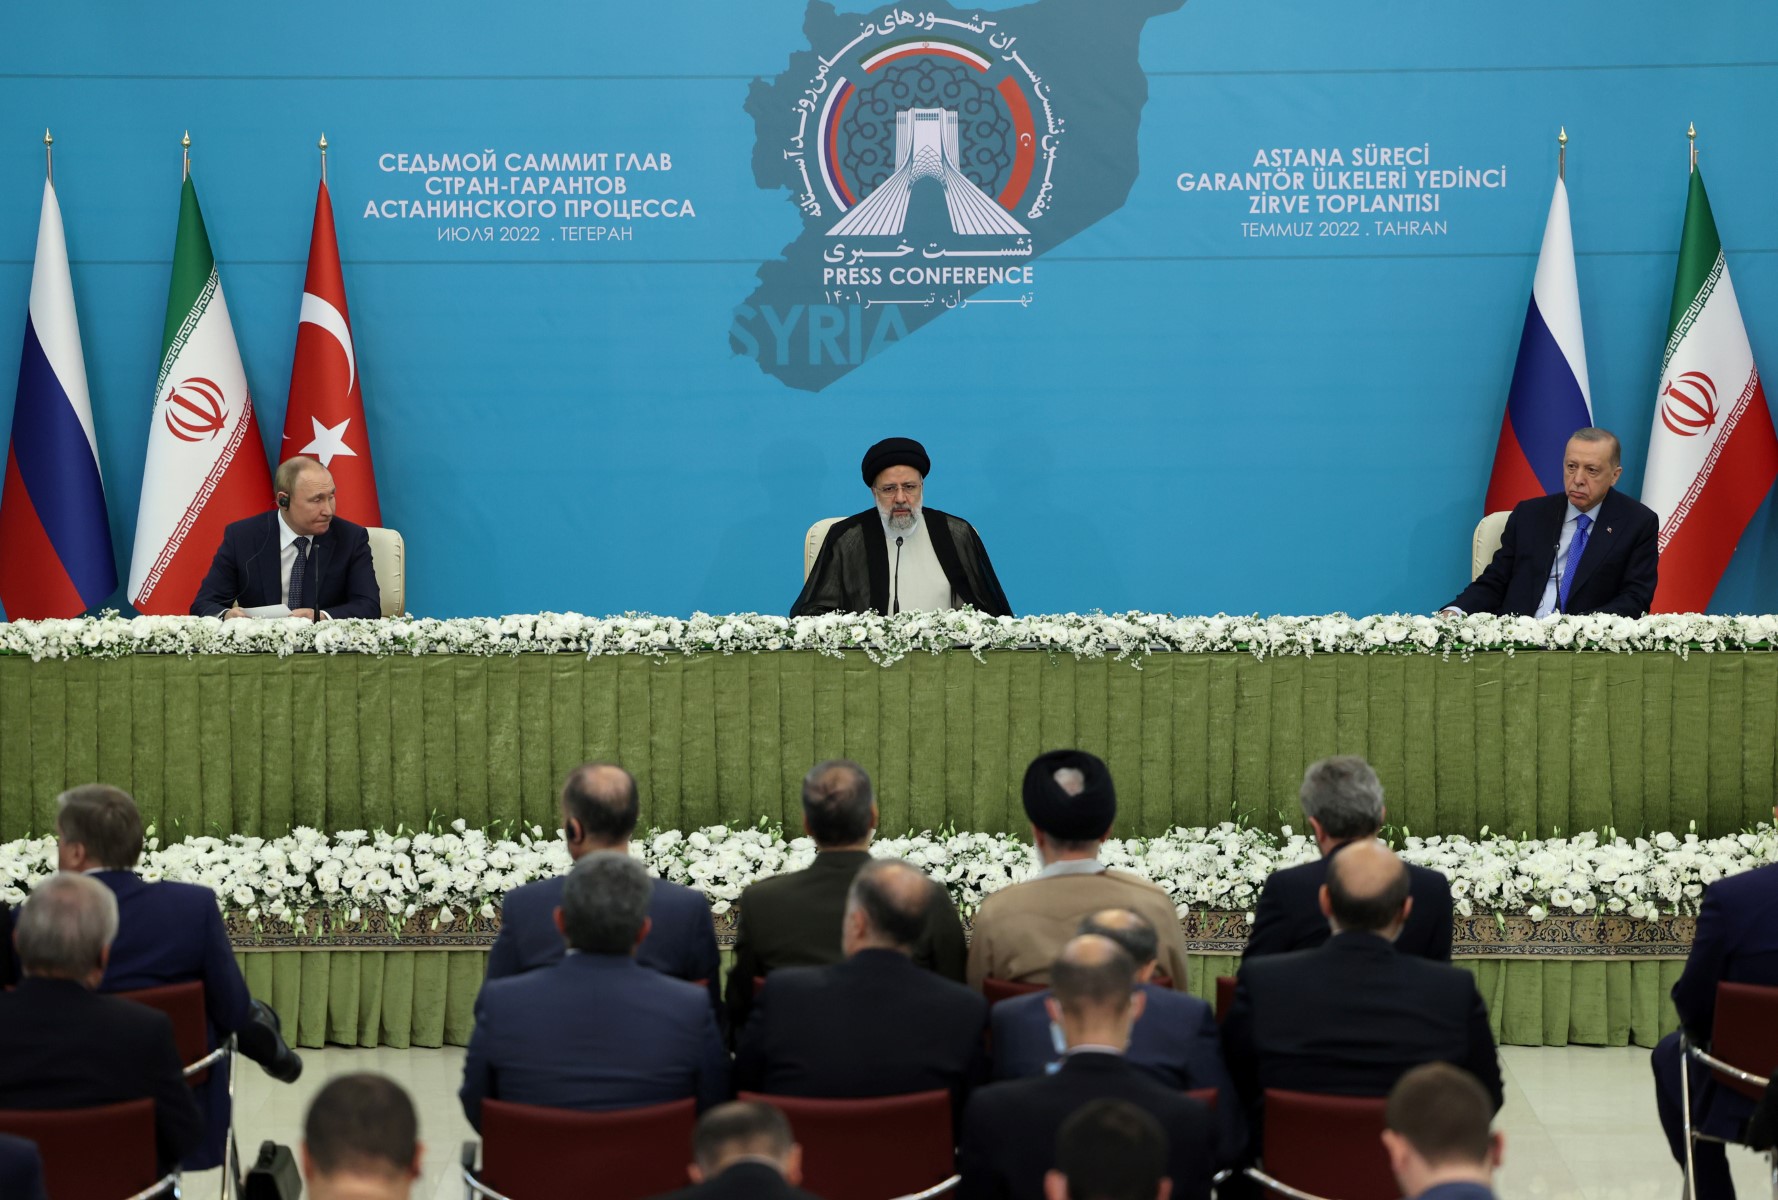 Press conference of presidents of Iran, Turkey and Russia